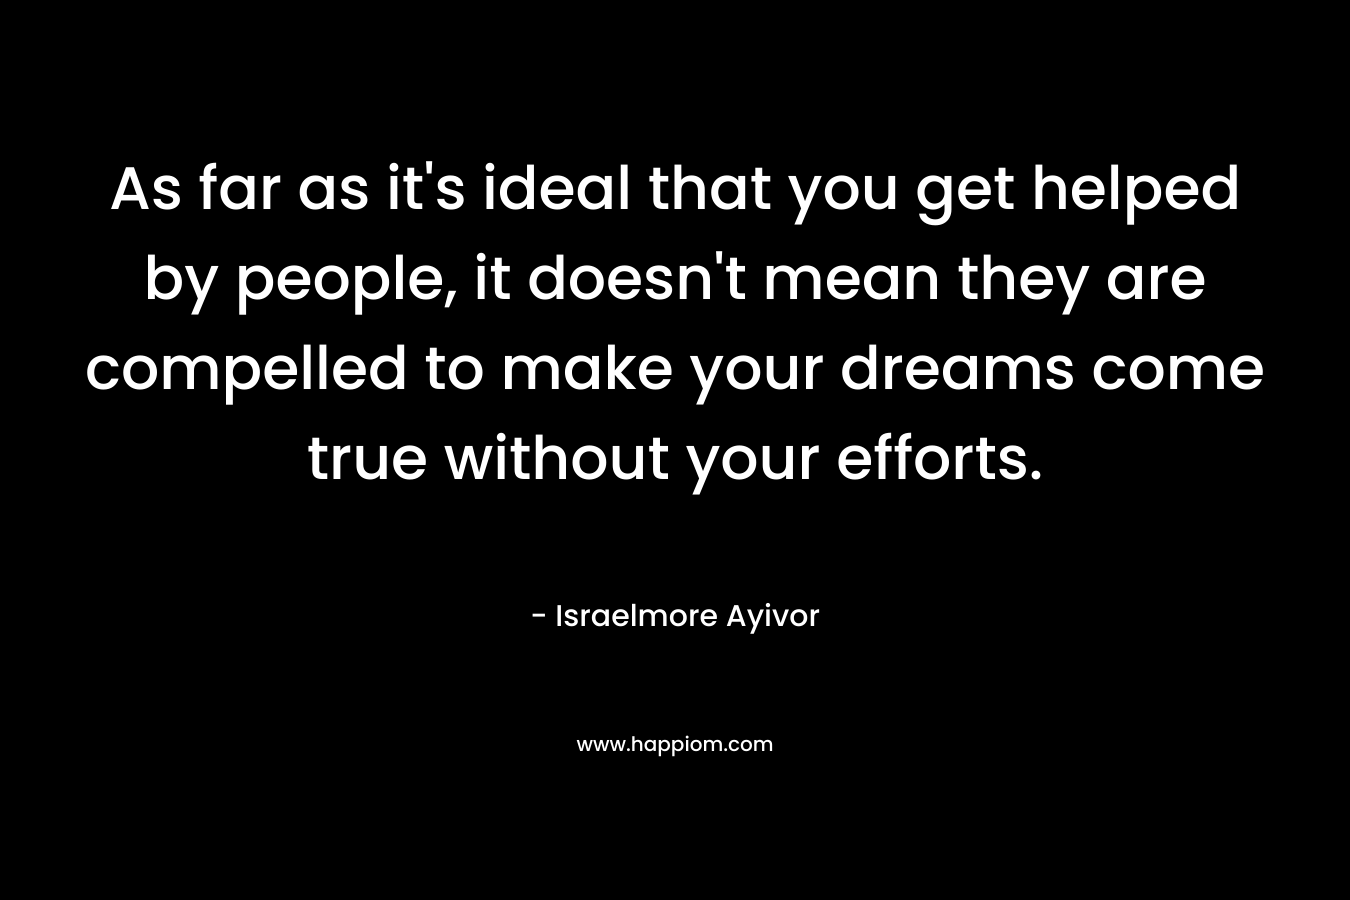 As far as it's ideal that you get helped by people, it doesn't mean they are compelled to make your dreams come true without your efforts.